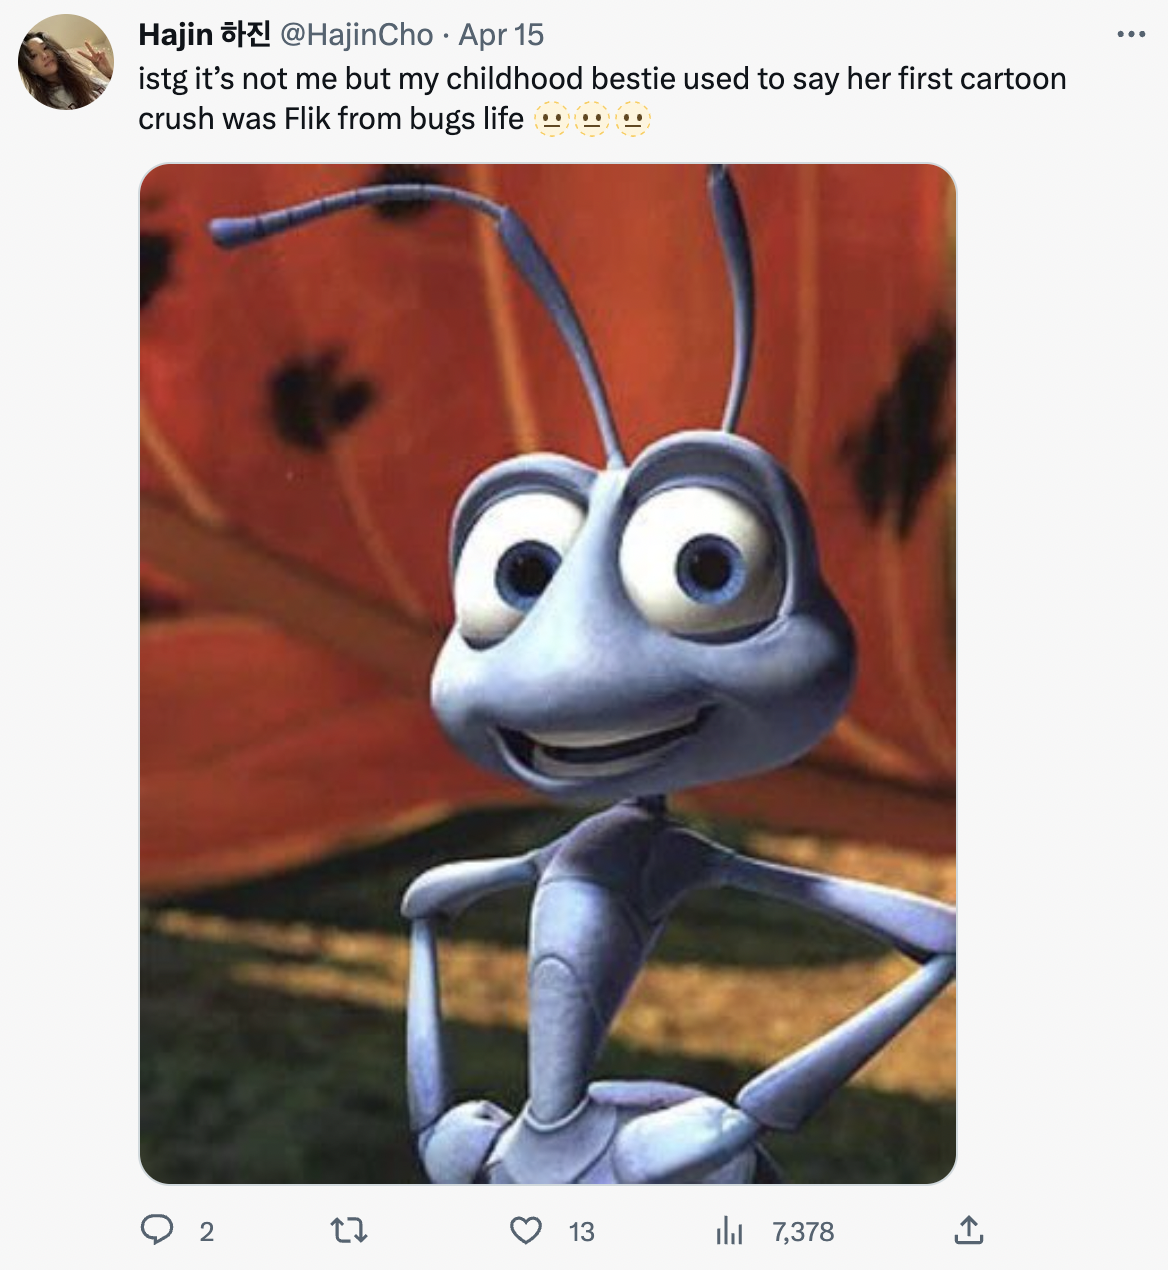 it's not me but my childhood bestie used to say her first cartoon crush was Flik from bugs life..